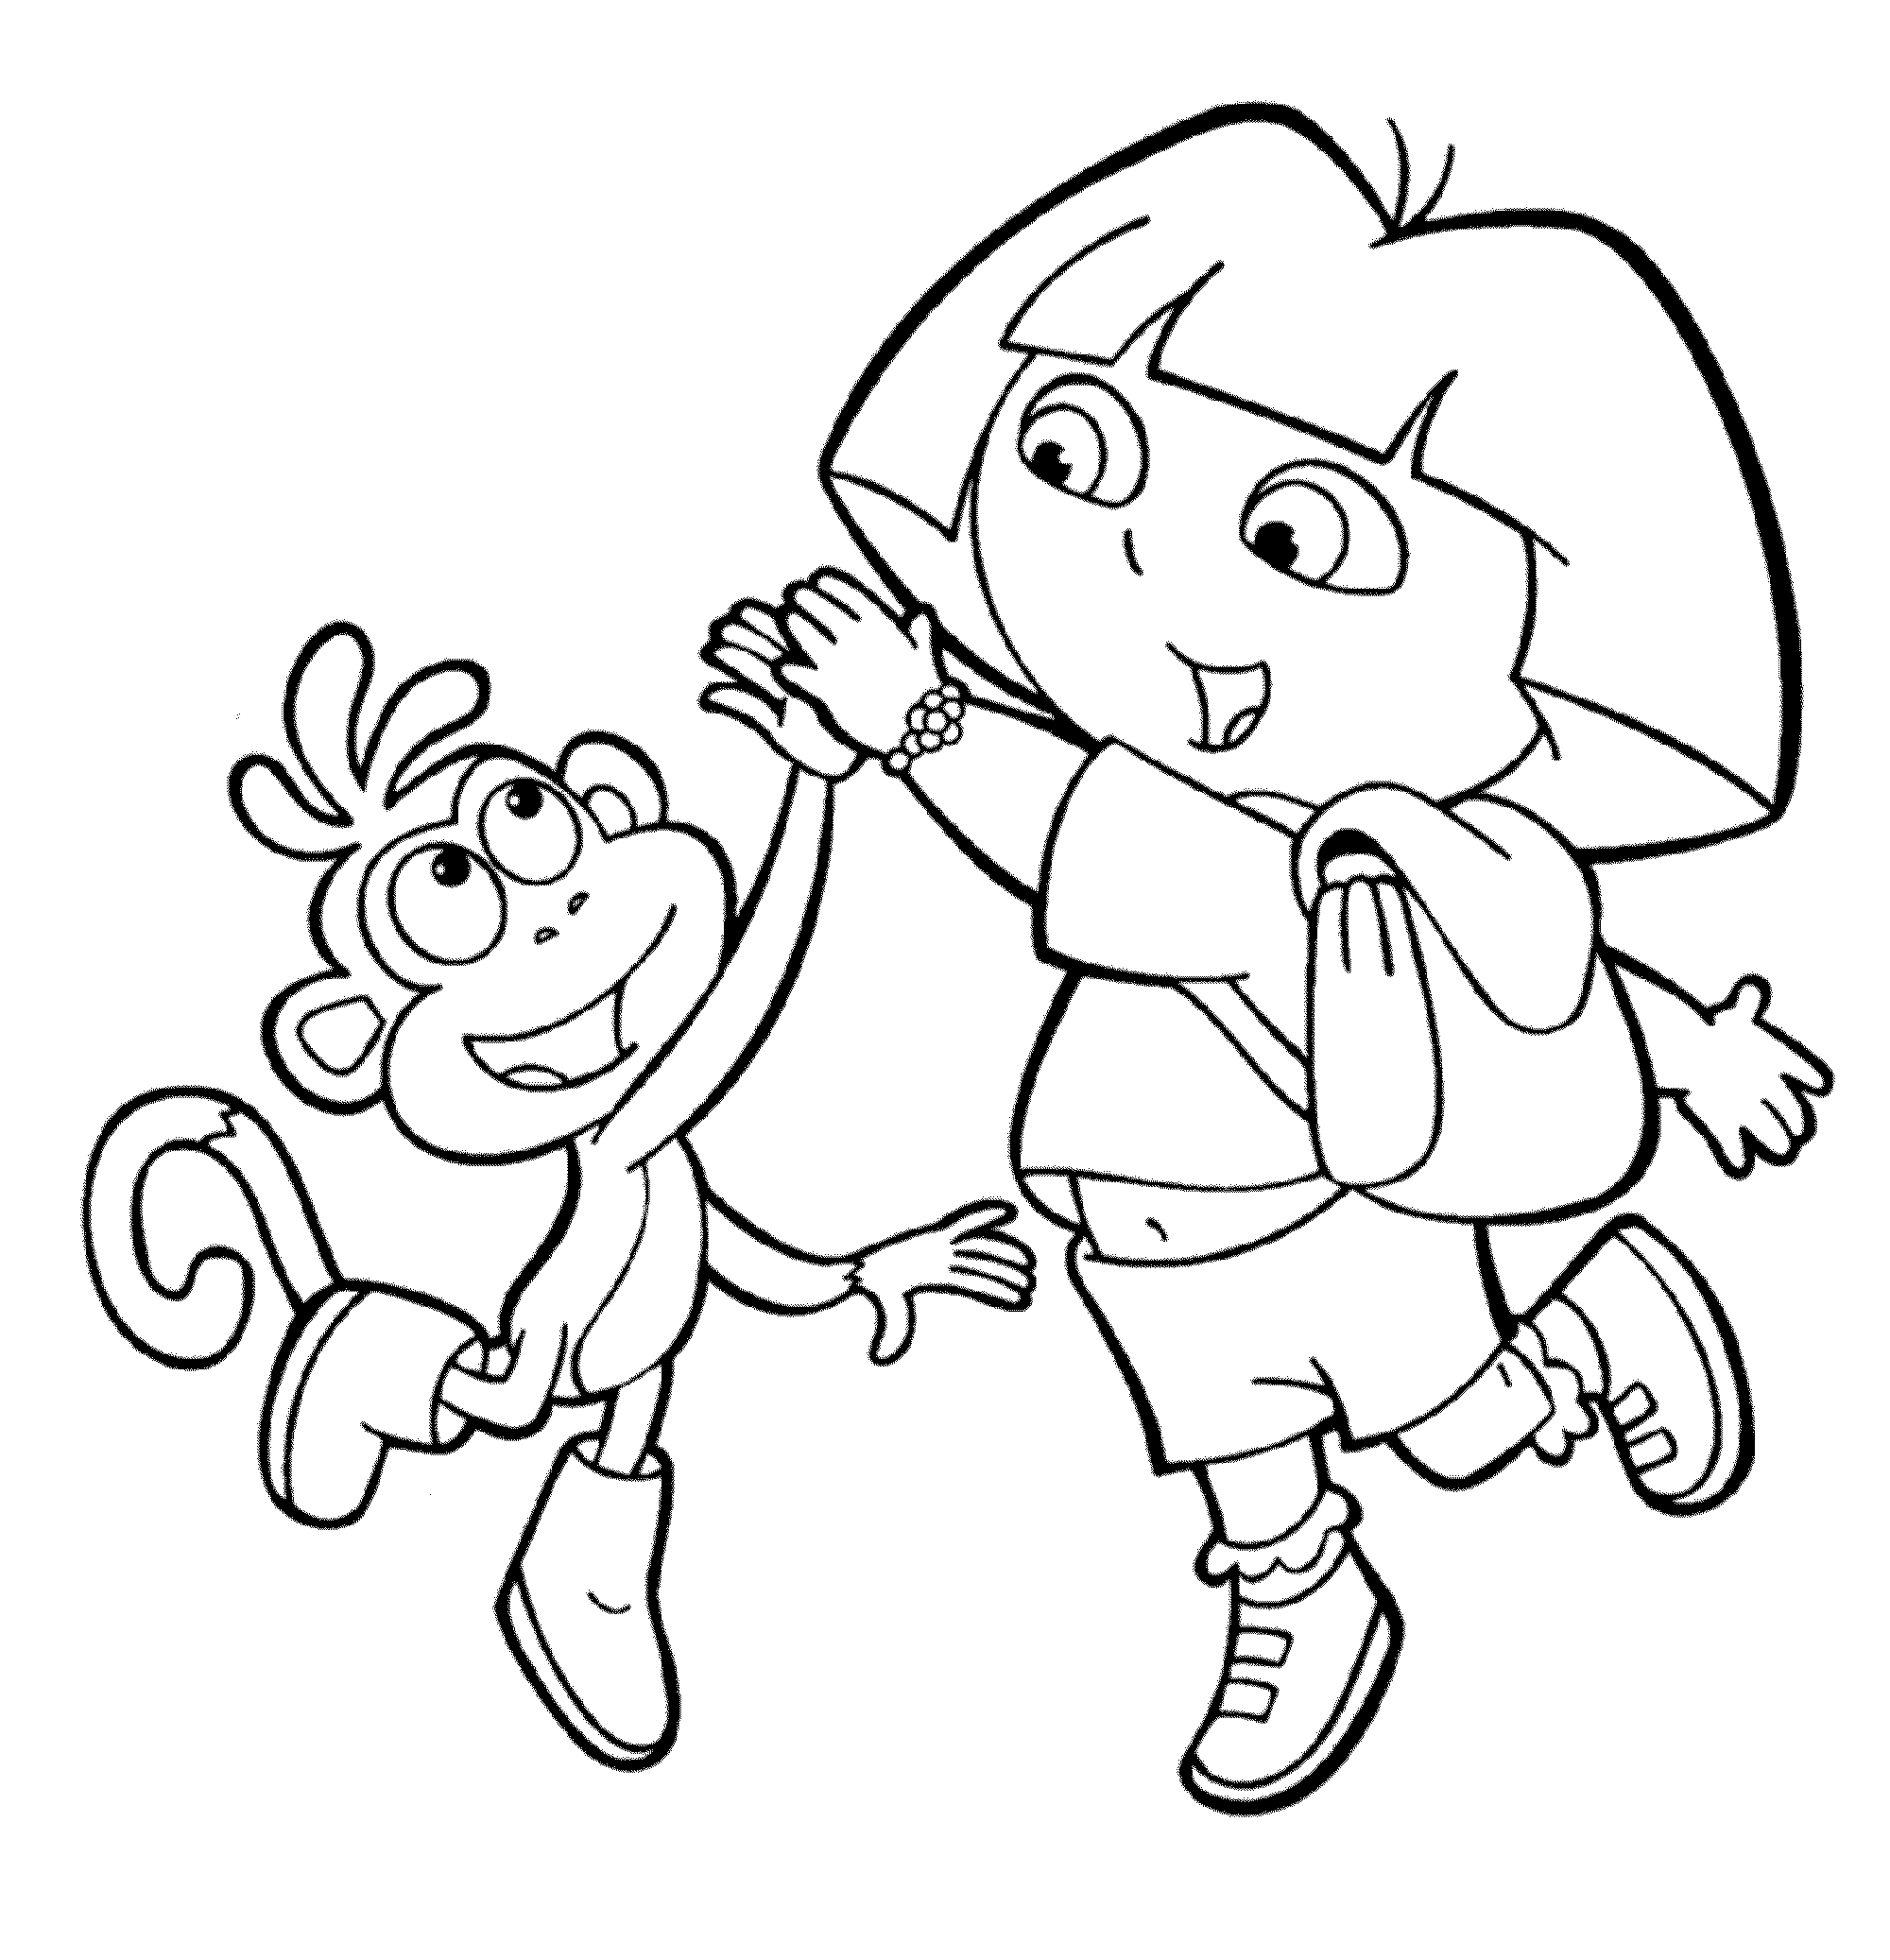 Print & Download Dora Coloring Pages to Learn New Things